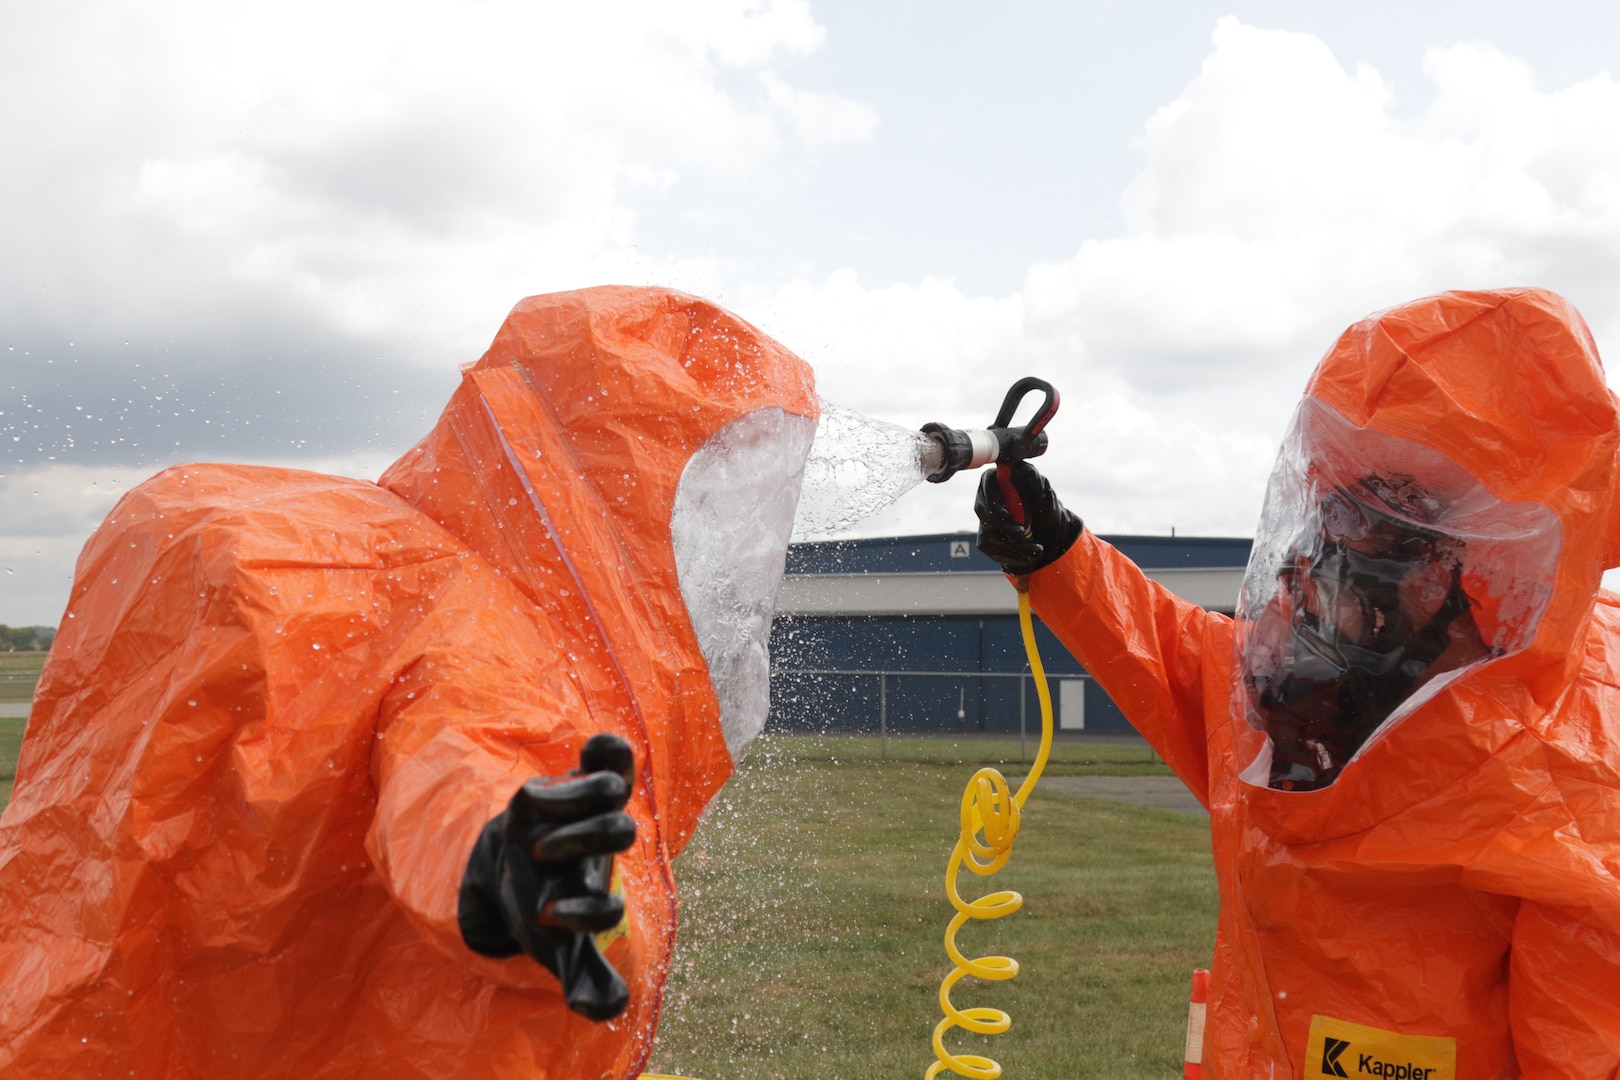 Members of the 52nd Civil Support Team (Weapons of Mass Destruction) decontaminate survey team personnel after exposure to an unknown agent during an exercise on Sept. 28, 2020, at the Fairfield County Airport, in Carroll, Ohio.